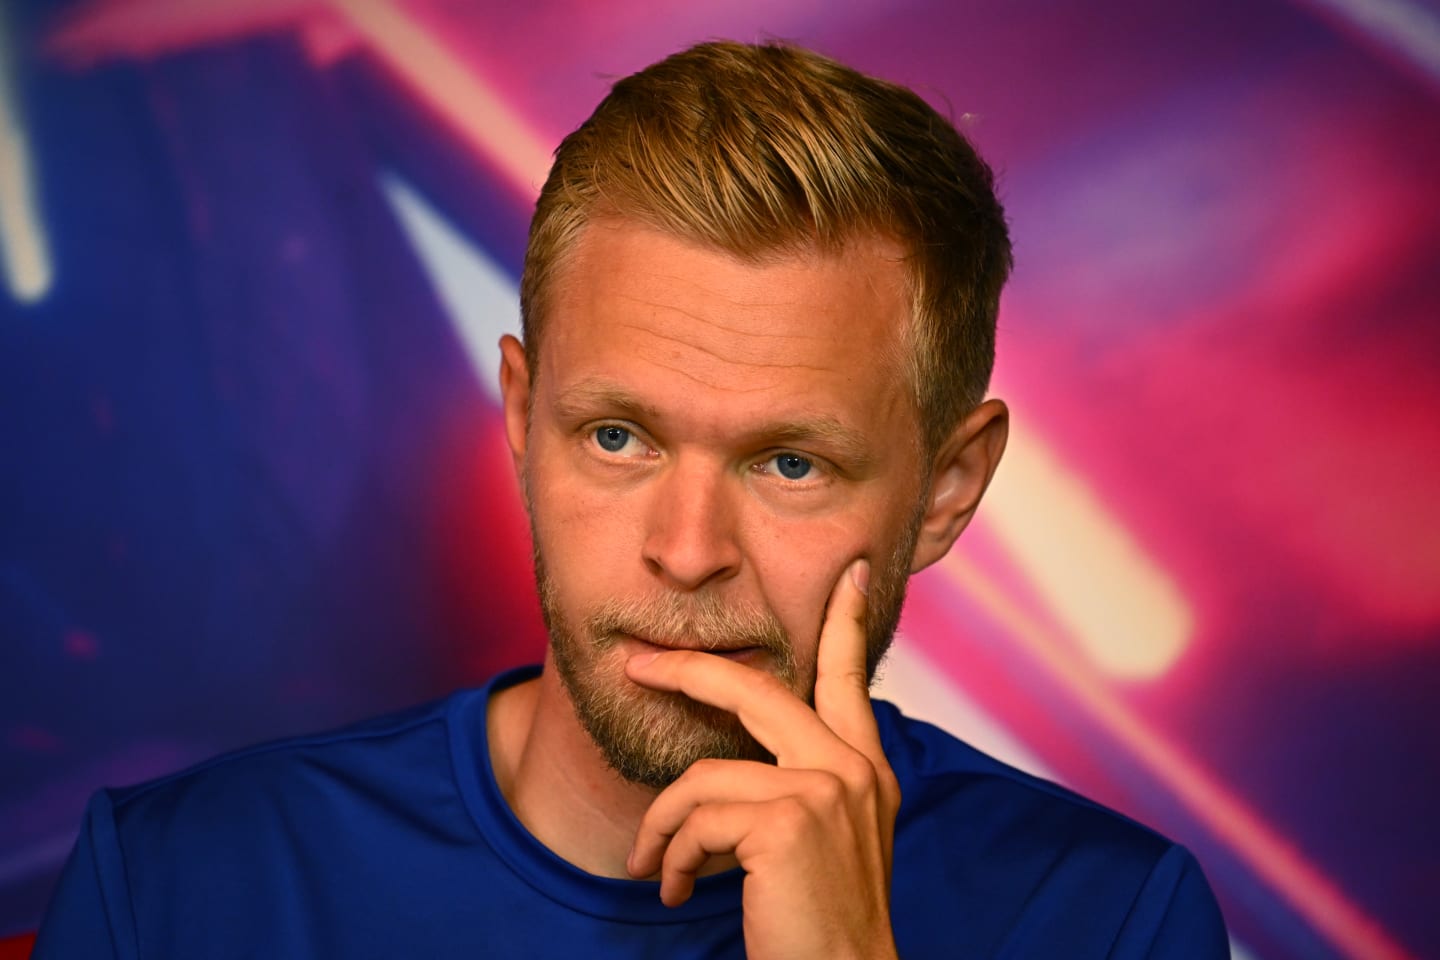 MONTREAL, QUEBEC - JUNE 17: Kevin Magnussen of Denmark and Haas F1 looks on in the Drivers Press Conference prior to practice ahead of the F1 Grand Prix of Canada at Circuit Gilles Villeneuve on June 17, 2022 in Montreal, Quebec. (Photo by Clive Mason/Getty Images)